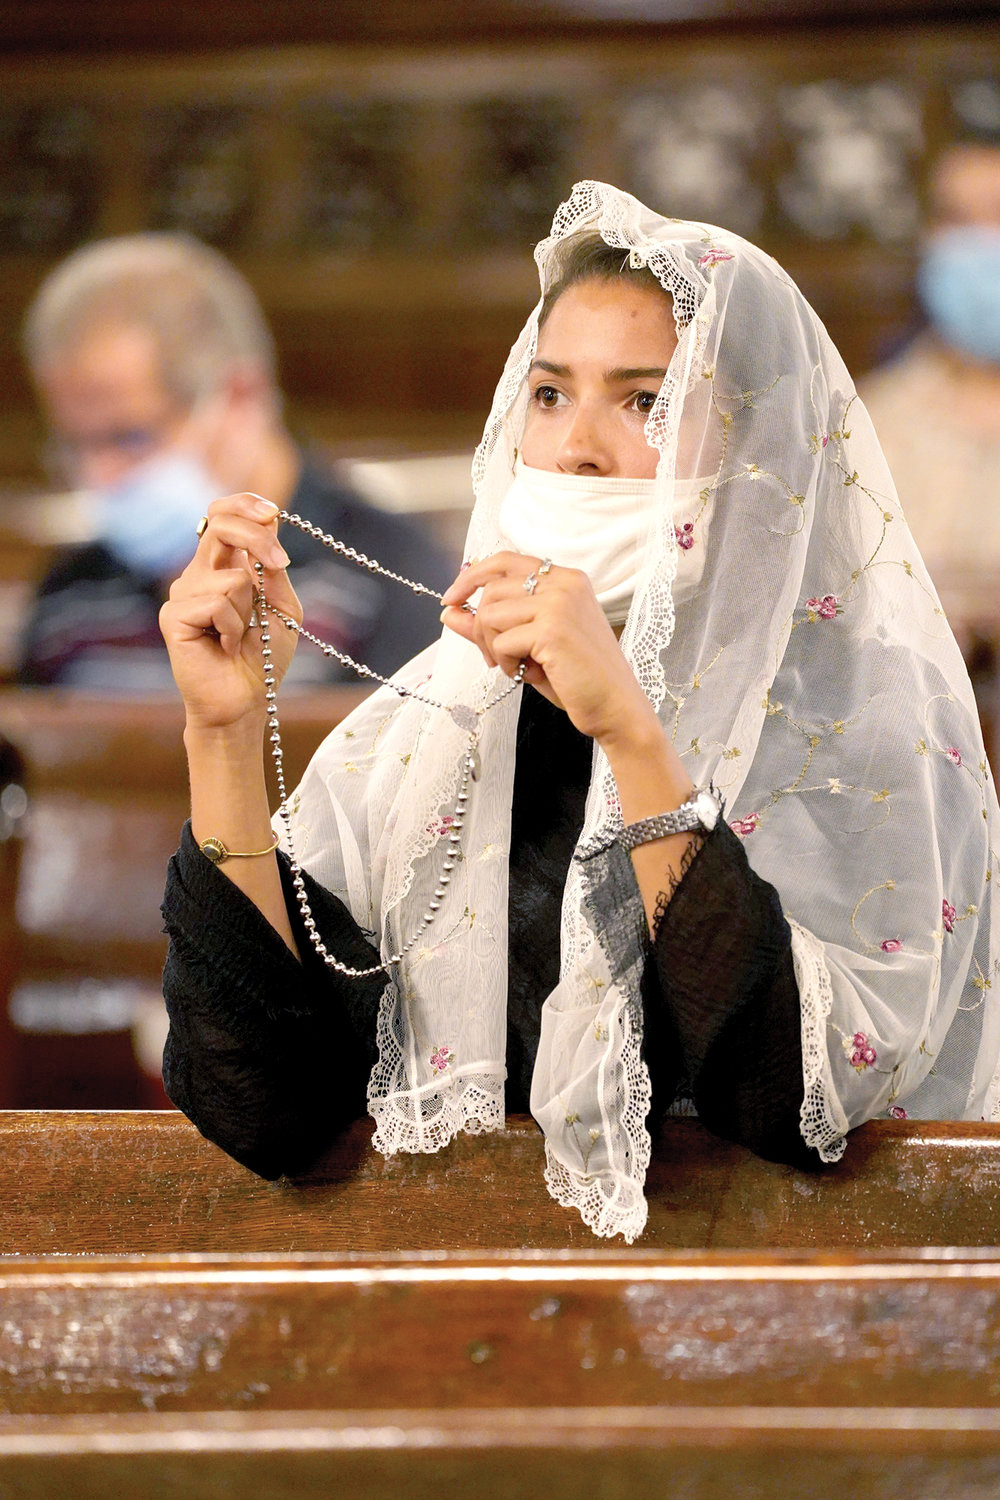 A woman prays the Rosary before the prayer service.